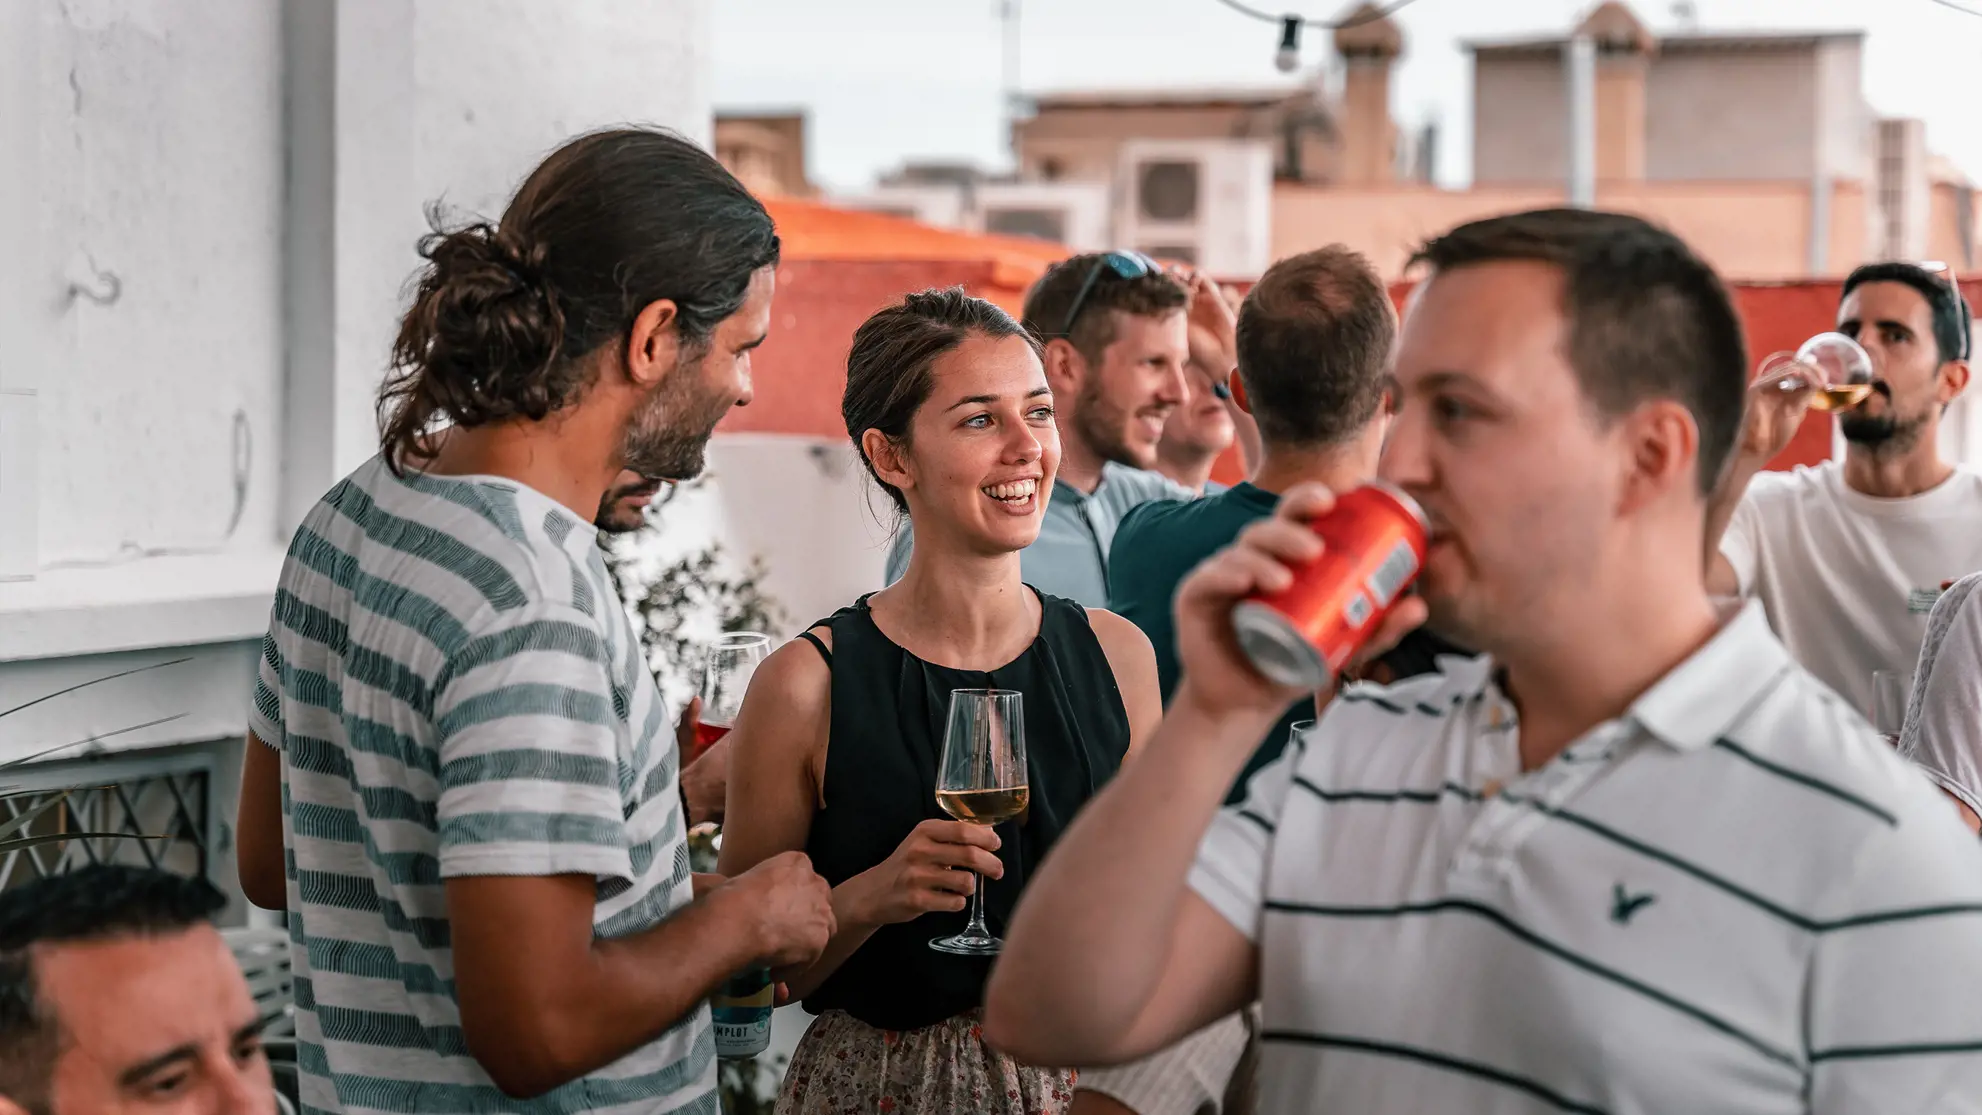 Employees during an after-work event on the rooftop terrace